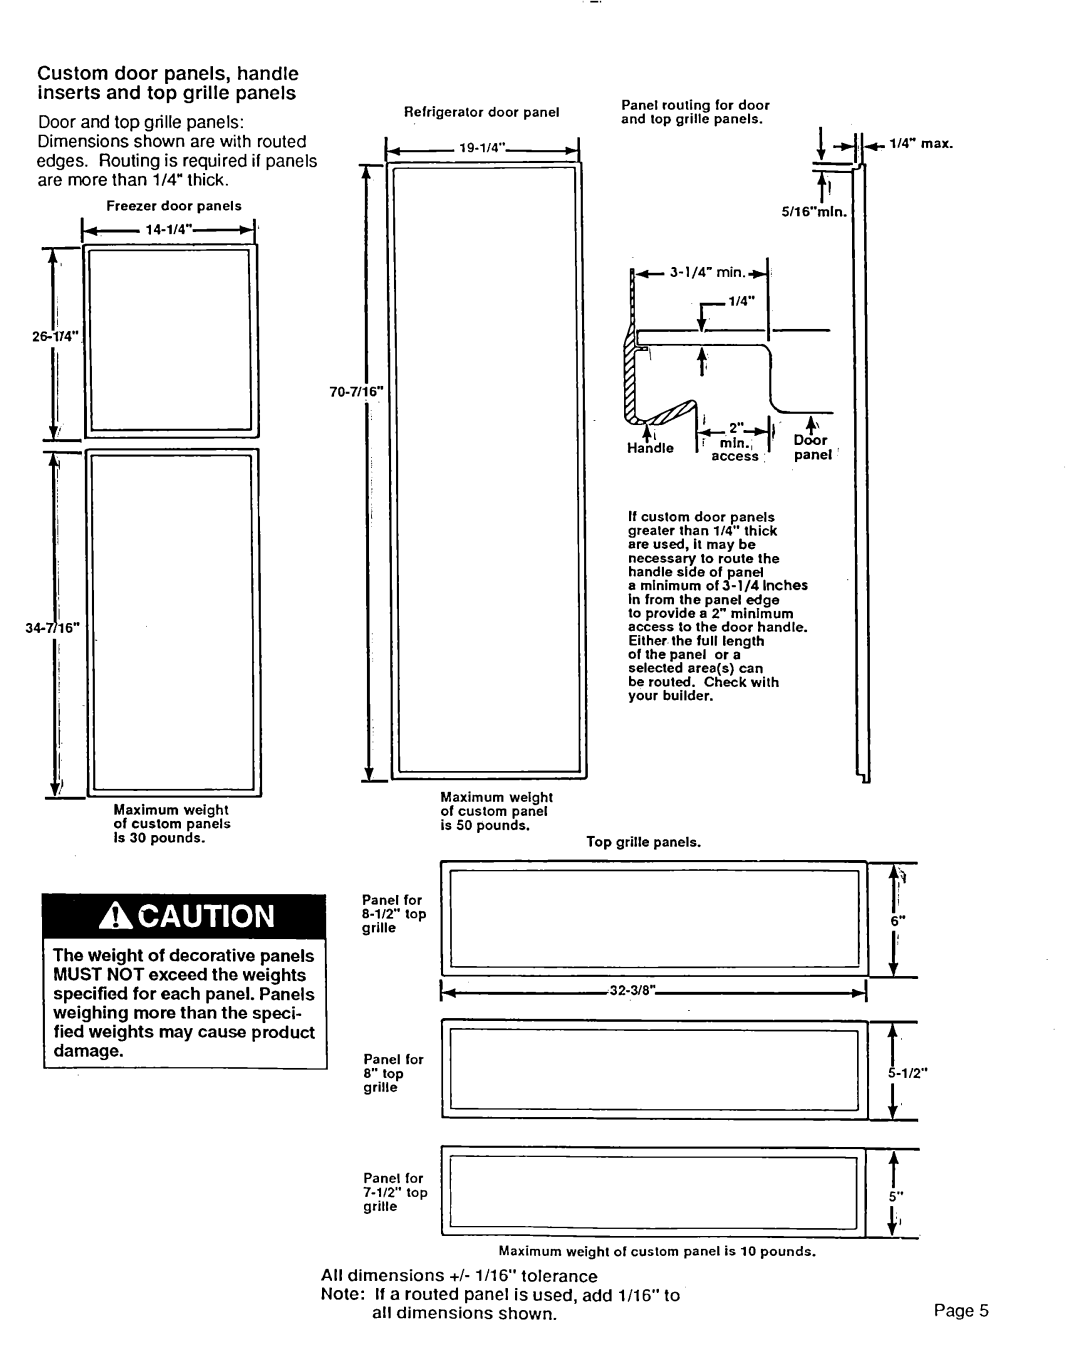 KitchenAid 2000491 installation instructions Custom door panels, handle inserts and top grille panels 